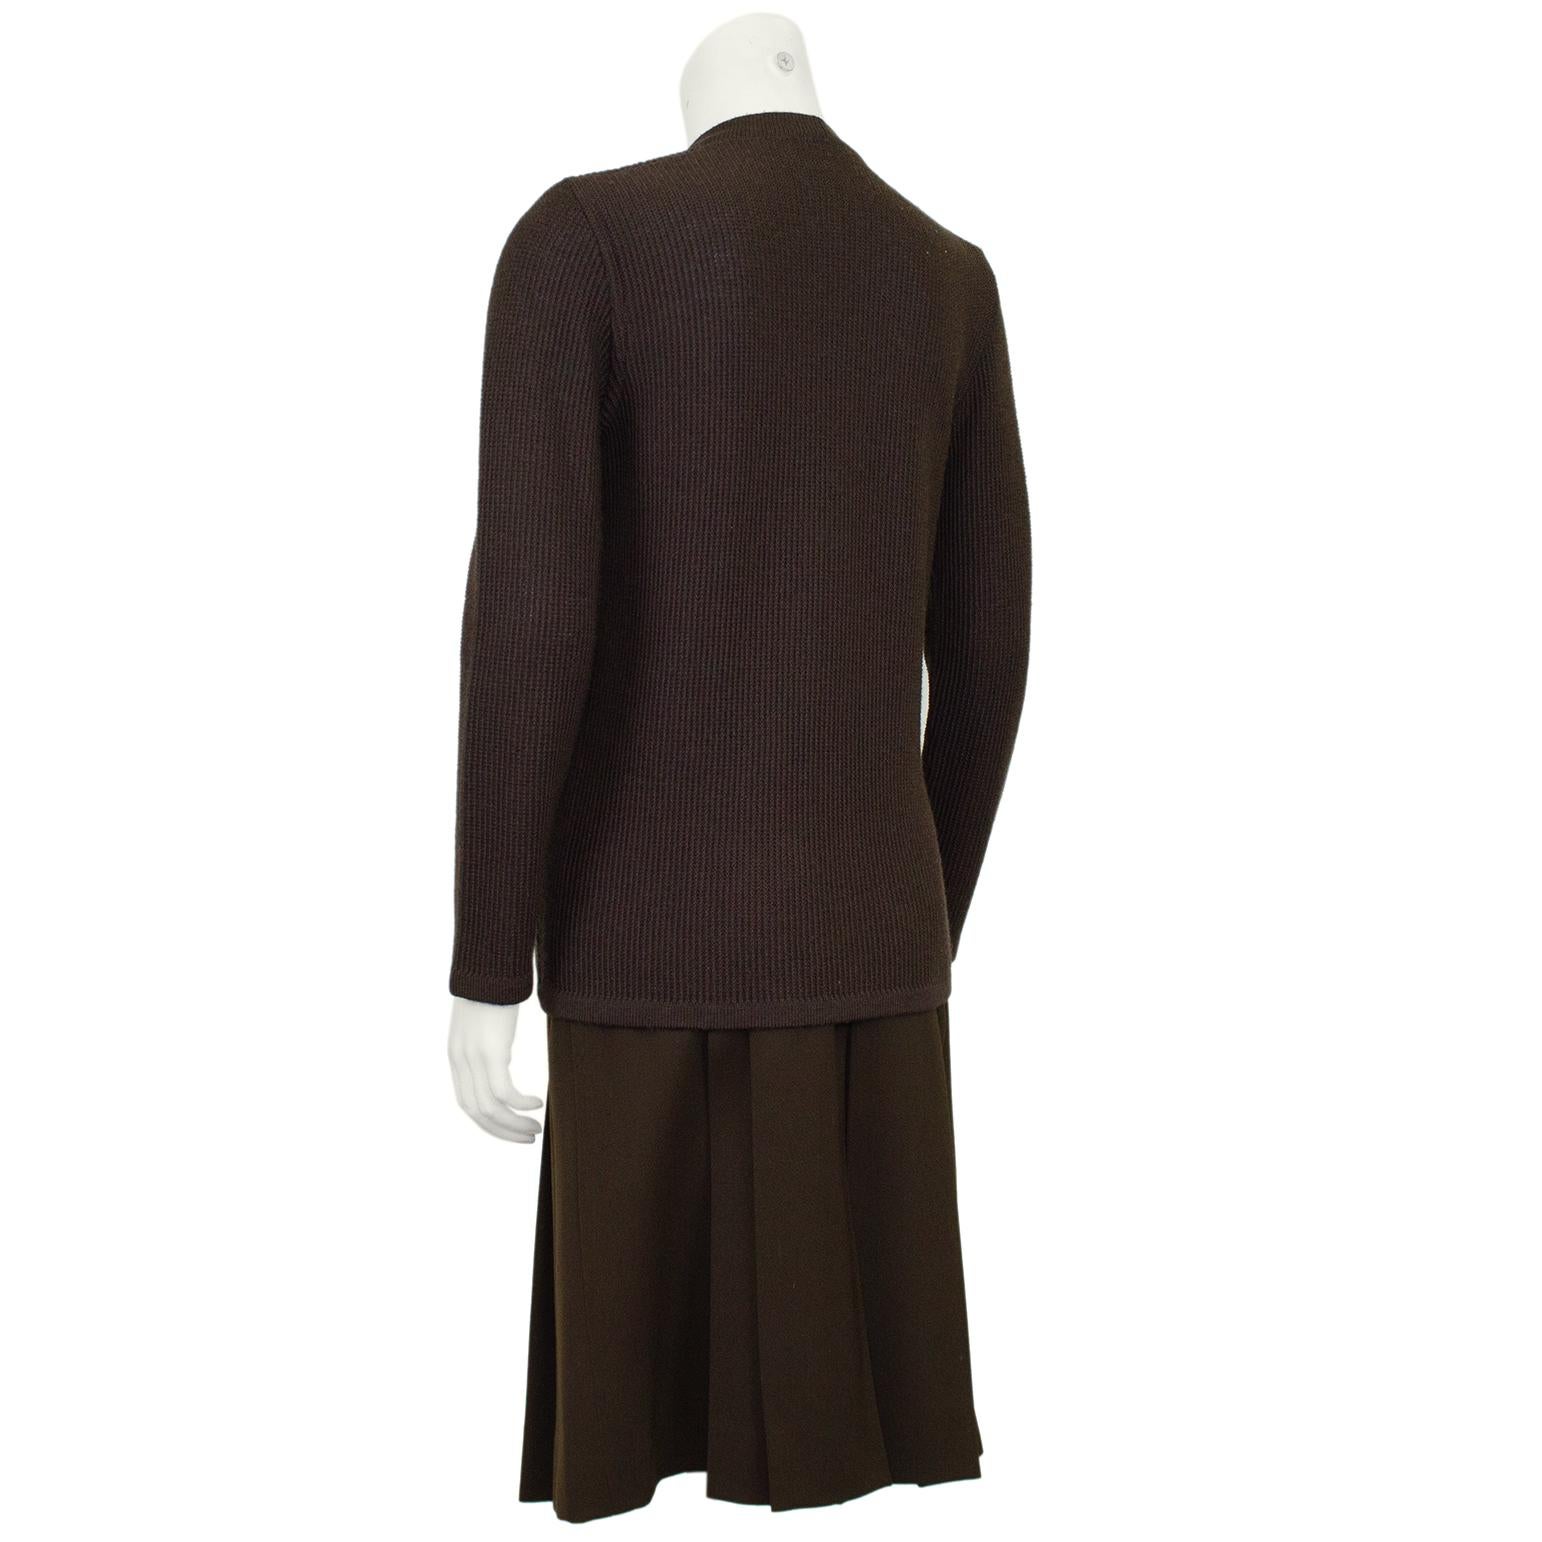 1970s Celine Chocolate Brown Wool Cardigan and Gabardine Skirt Ensemble In Good Condition For Sale In Toronto, Ontario